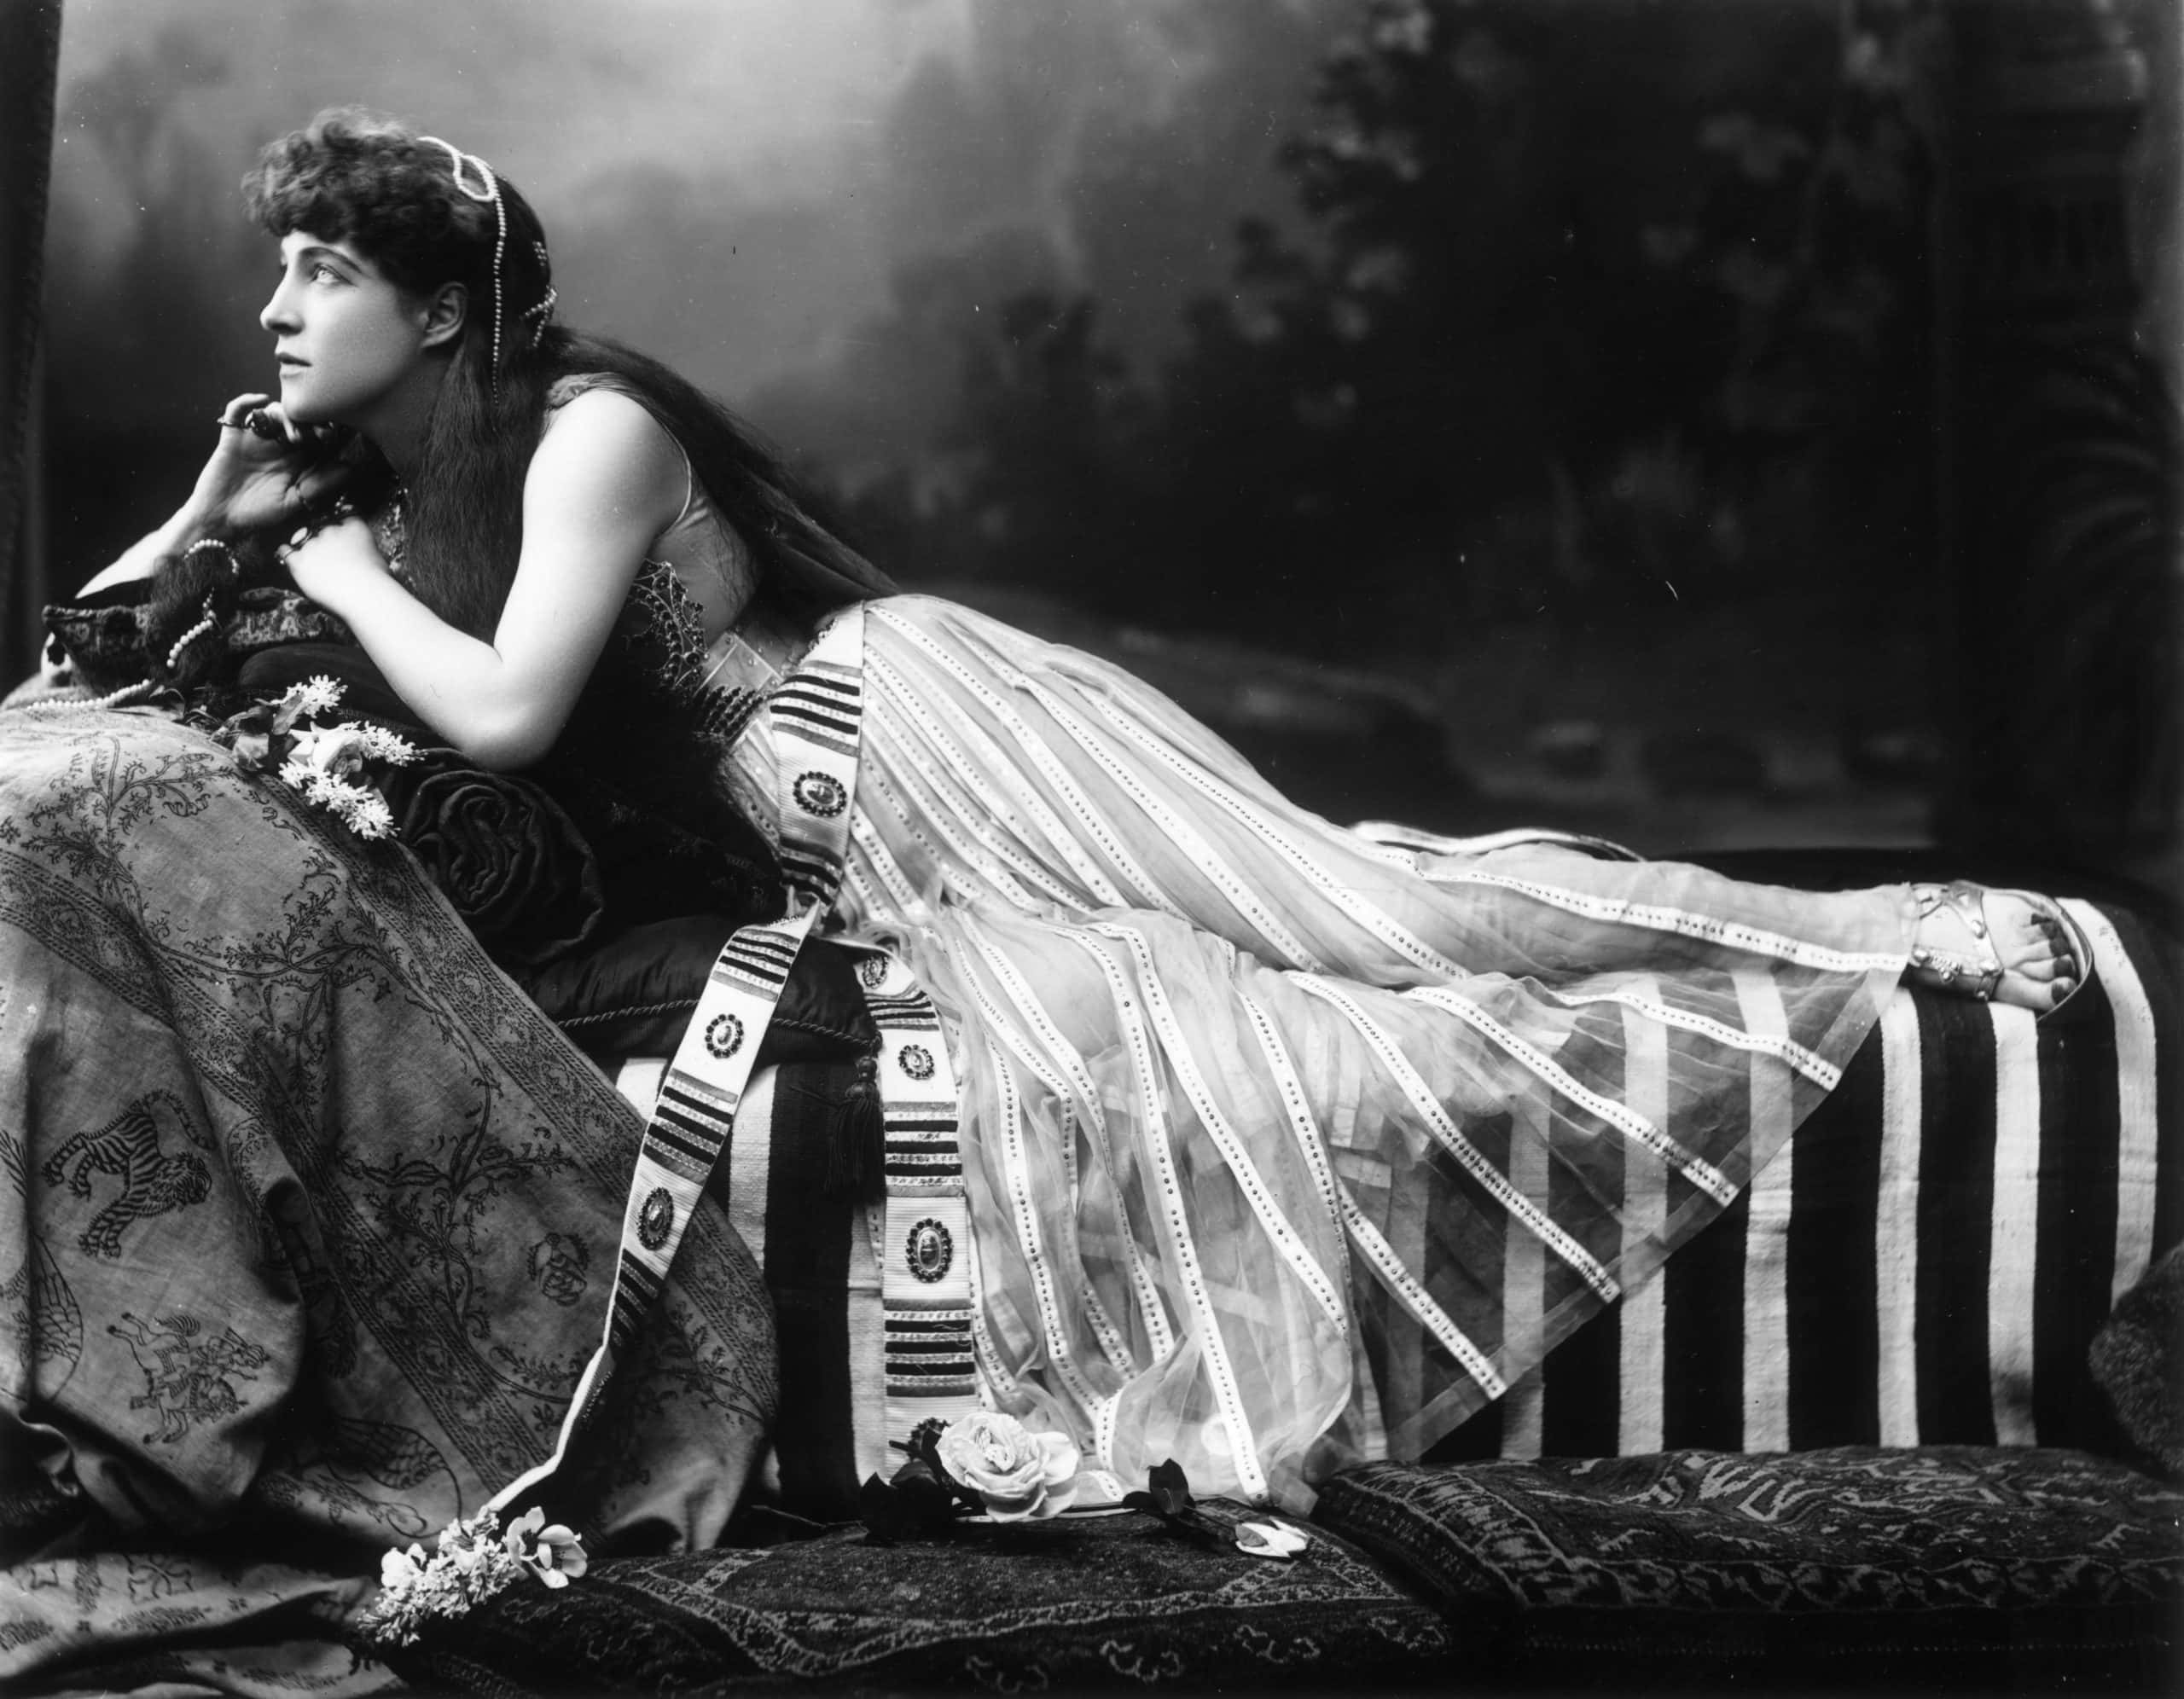 Lillie Langtry facts